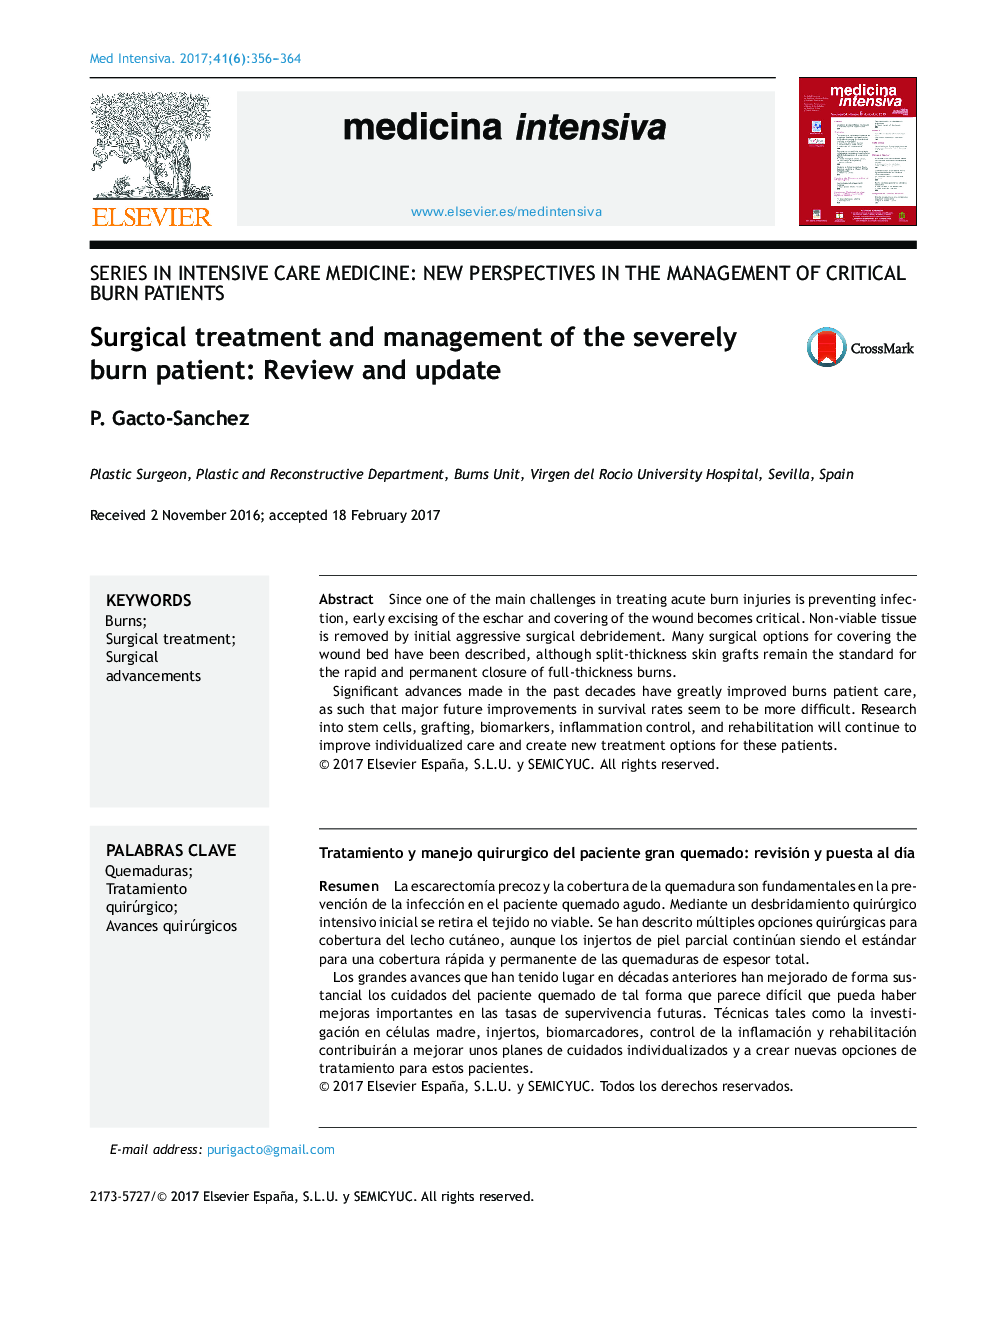 Surgical treatment and management of the severely burn patient: Review and update